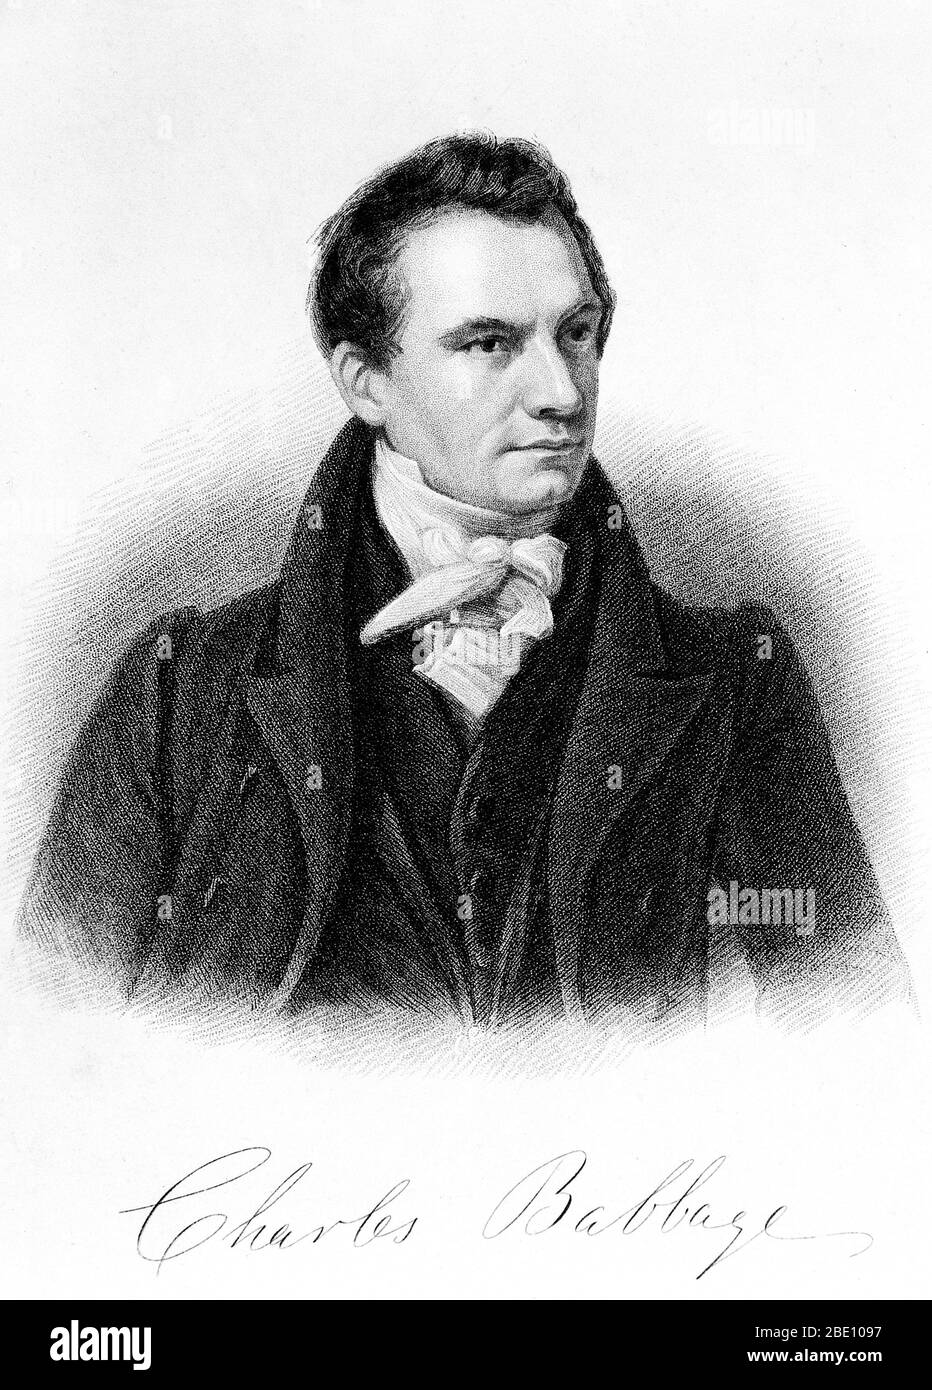 Charles Babbage (December 26, 1791 - October 18, 1871) was an English polymath. A mathematician, philosopher, inventor and mechanical engineer, he is best remembered for originating the concept of a digital programmable computer. Considered by some to be a 'father of the computer', Babbage is credited with inventing the first mechanical computer that eventually led to more complex electronic designs, though all the essential ideas of modern computers are to be found in Babbage's analytical engine. His varied work in other fields has led him to be described as 'pre-eminent' among the many polym Stock Photo